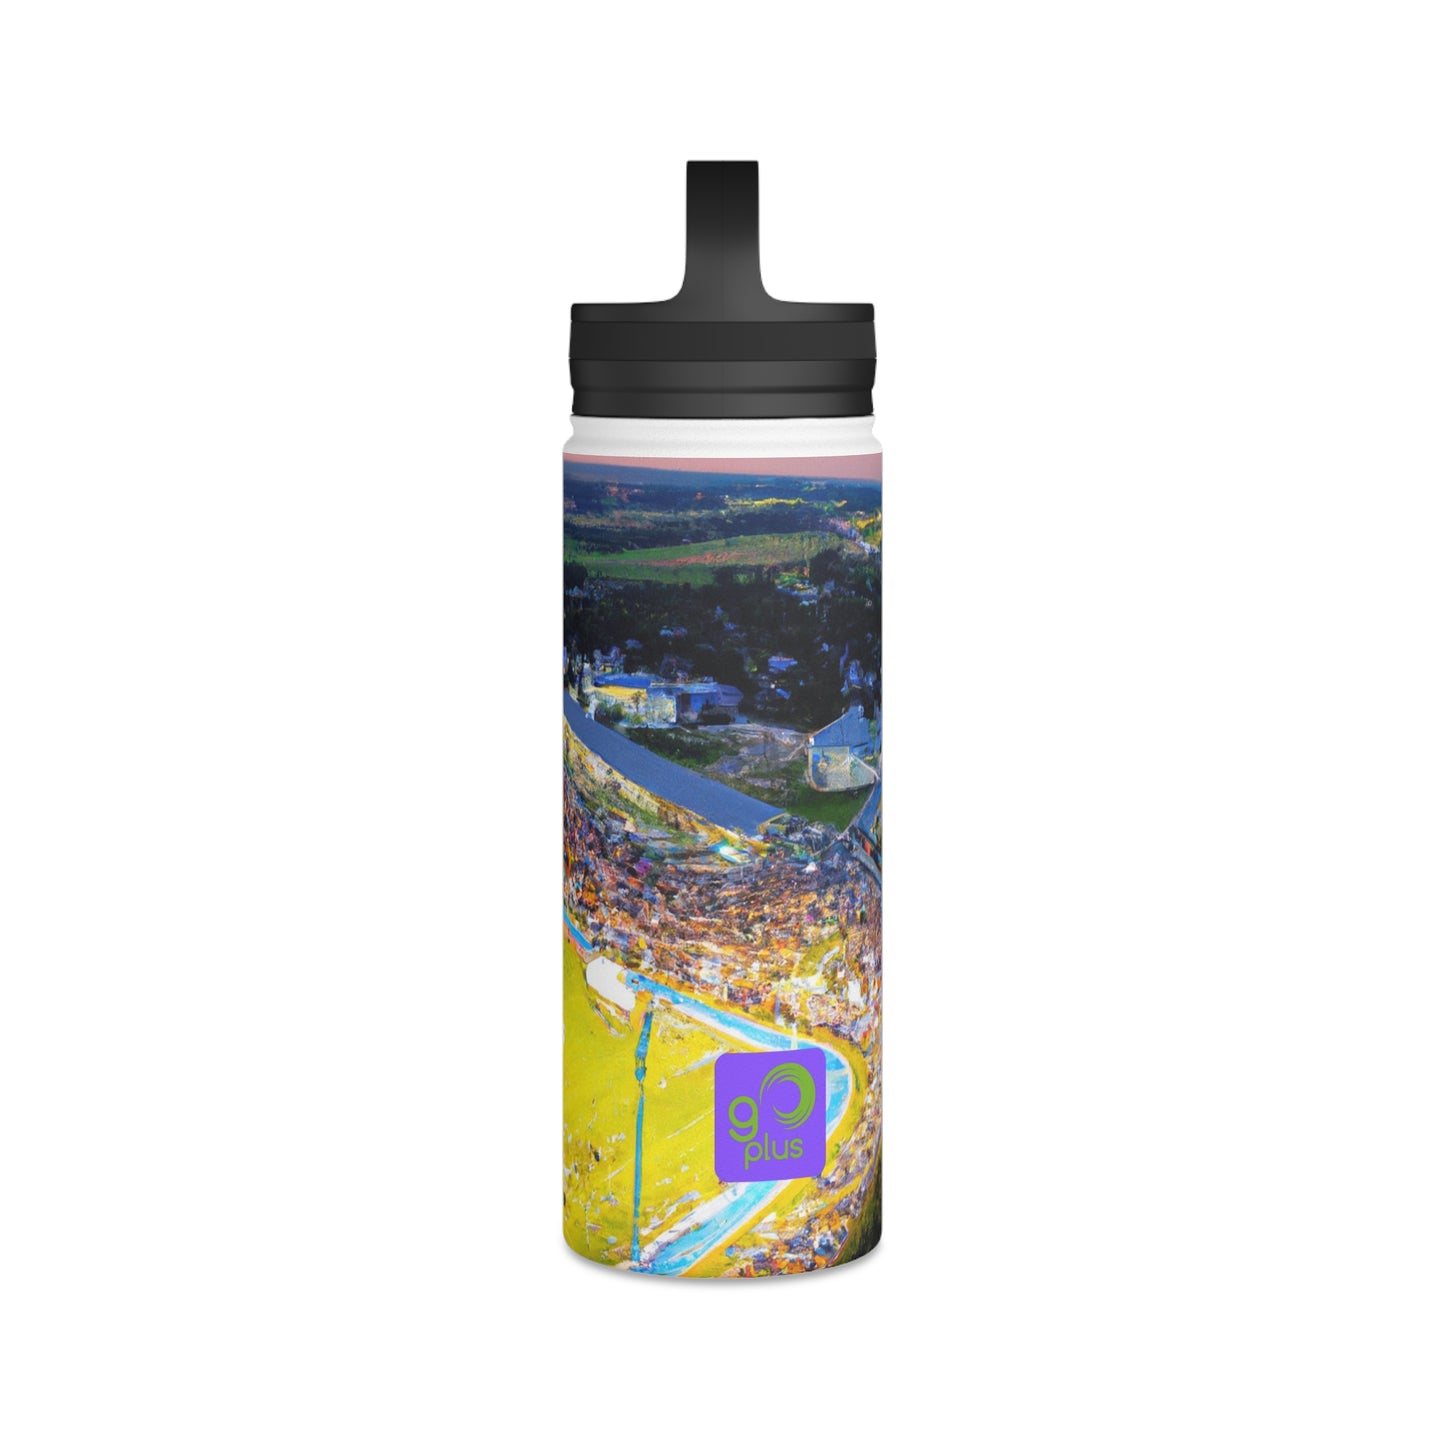 "Dynamic Gameplay in Art: Capturing the Energy and Movement of Sports" - Go Plus Stainless Steel Water Bottle, Handle Lid